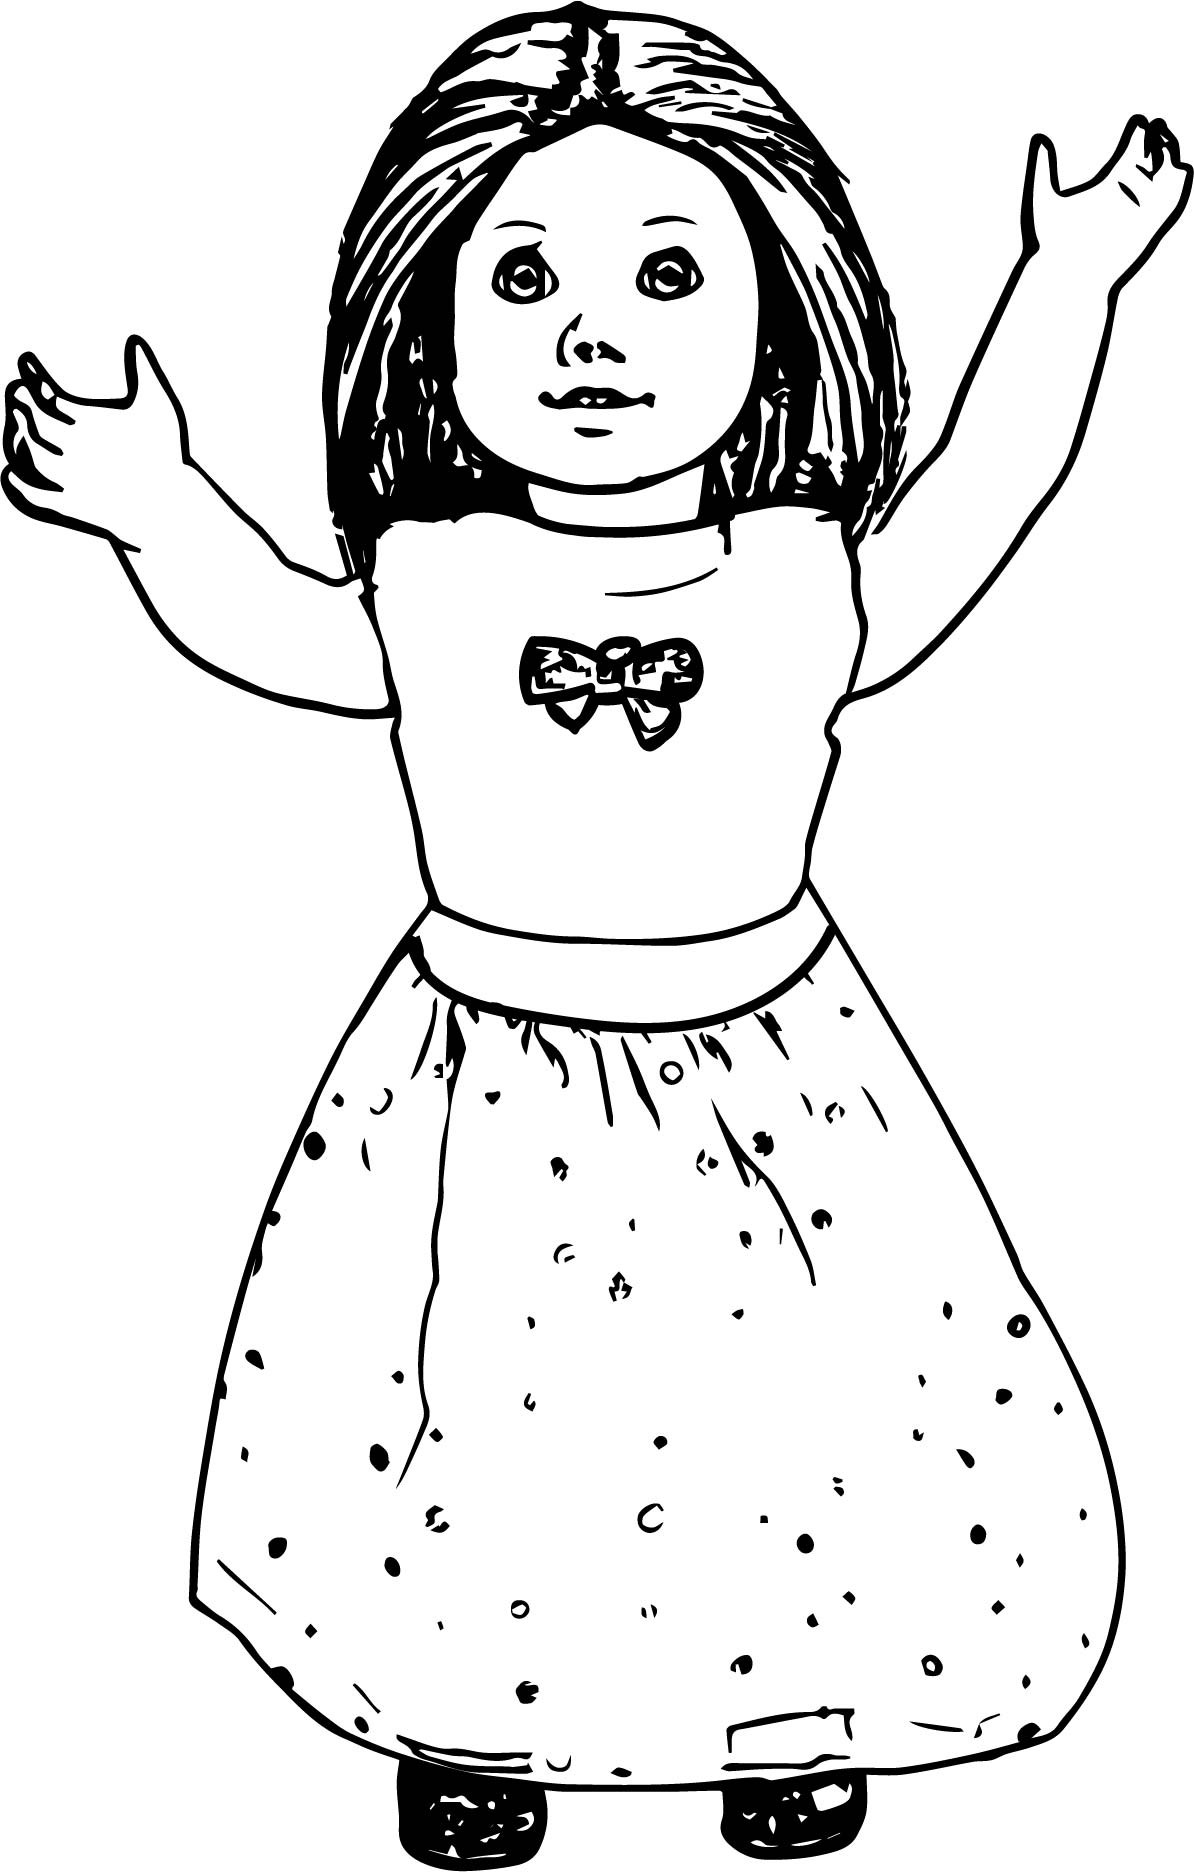 American Girl Coloring Pages Samantha
 American Girl Coloring Pages Best Coloring Pages For Kids